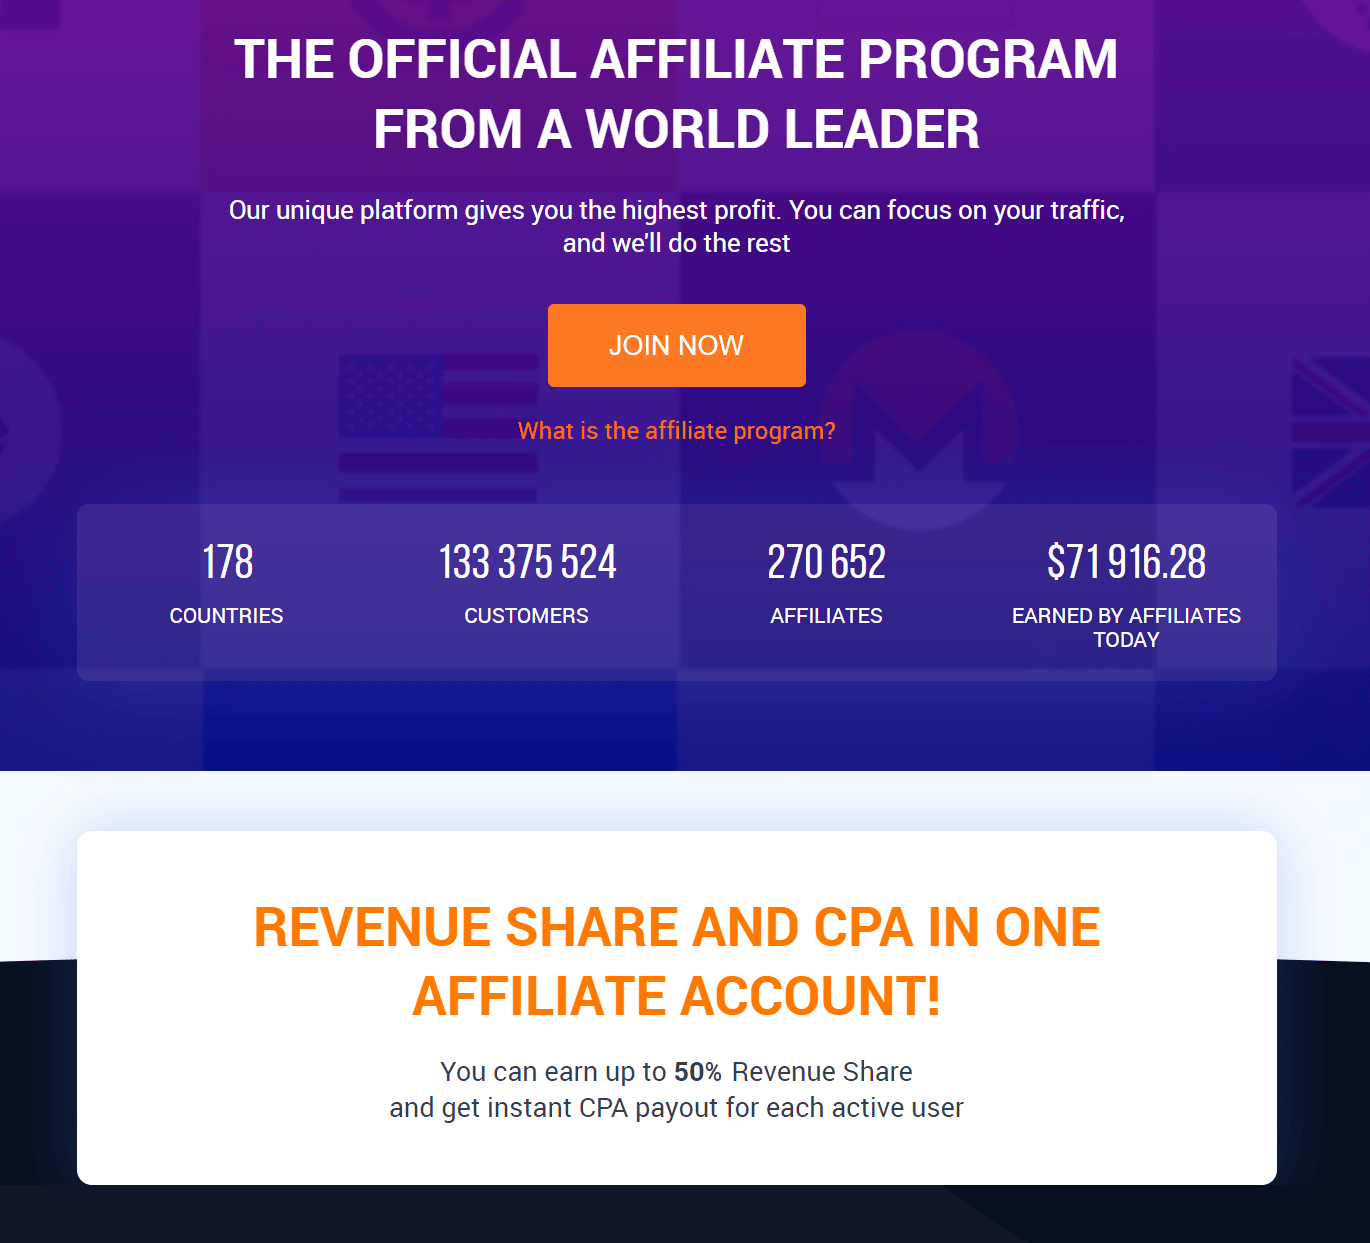 The IQ Option Affiliate porgram is a leading revenue share program in the Fintech industry.